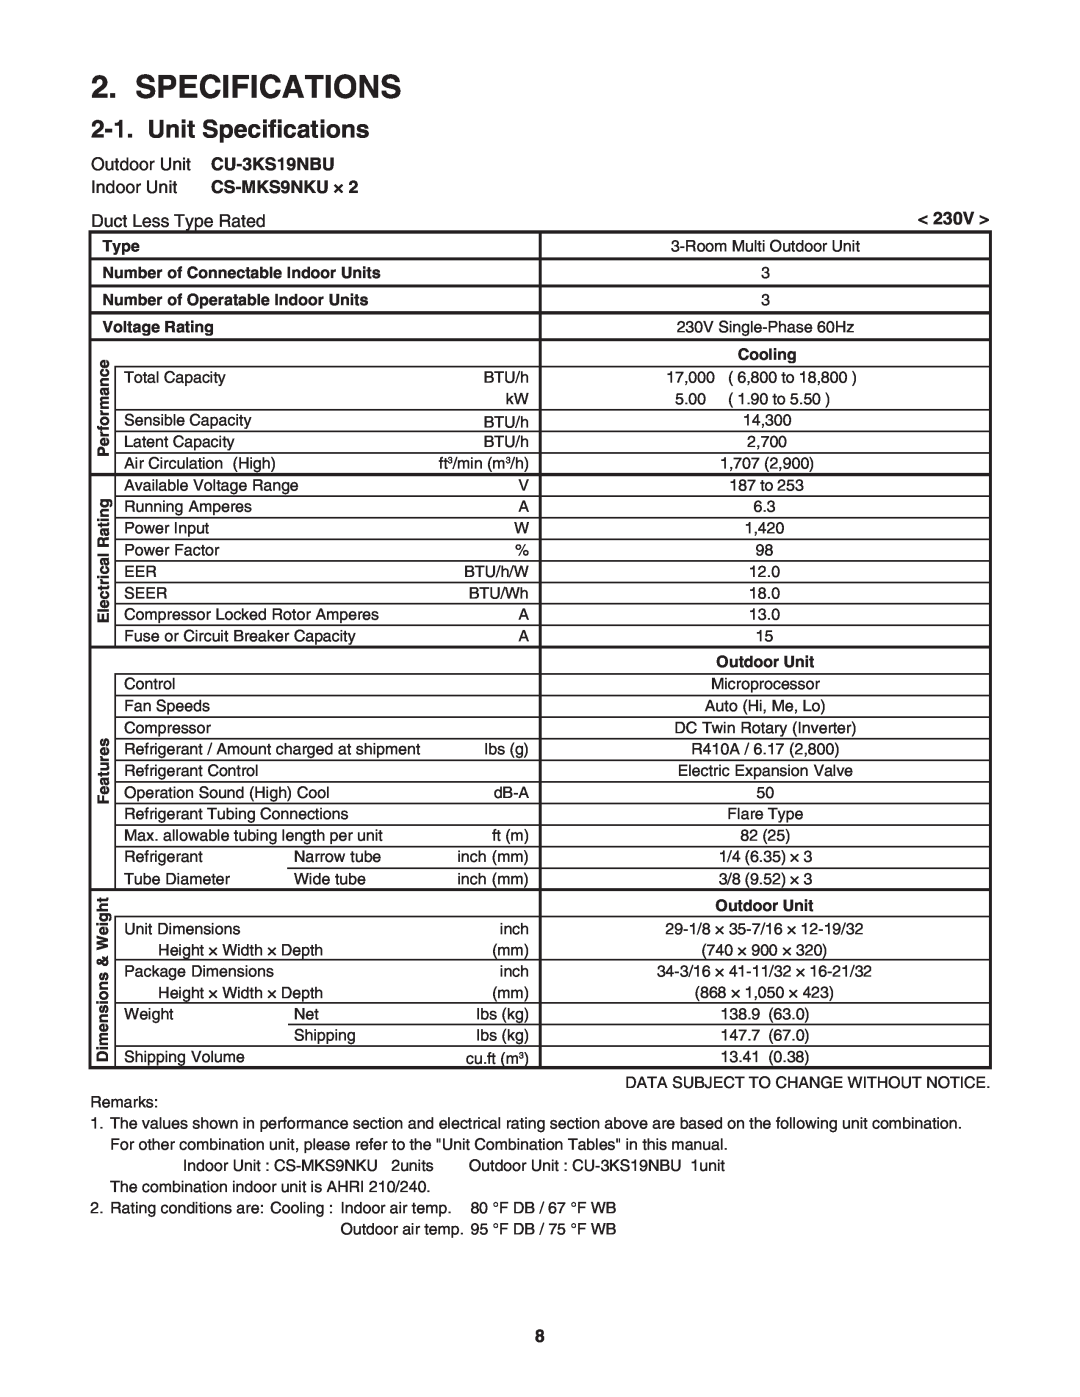 Panasonic CU-4KS31NBU Unit Specifications, Type, Number of Connectable Indoor Units, Number of Operatable Indoor Units 